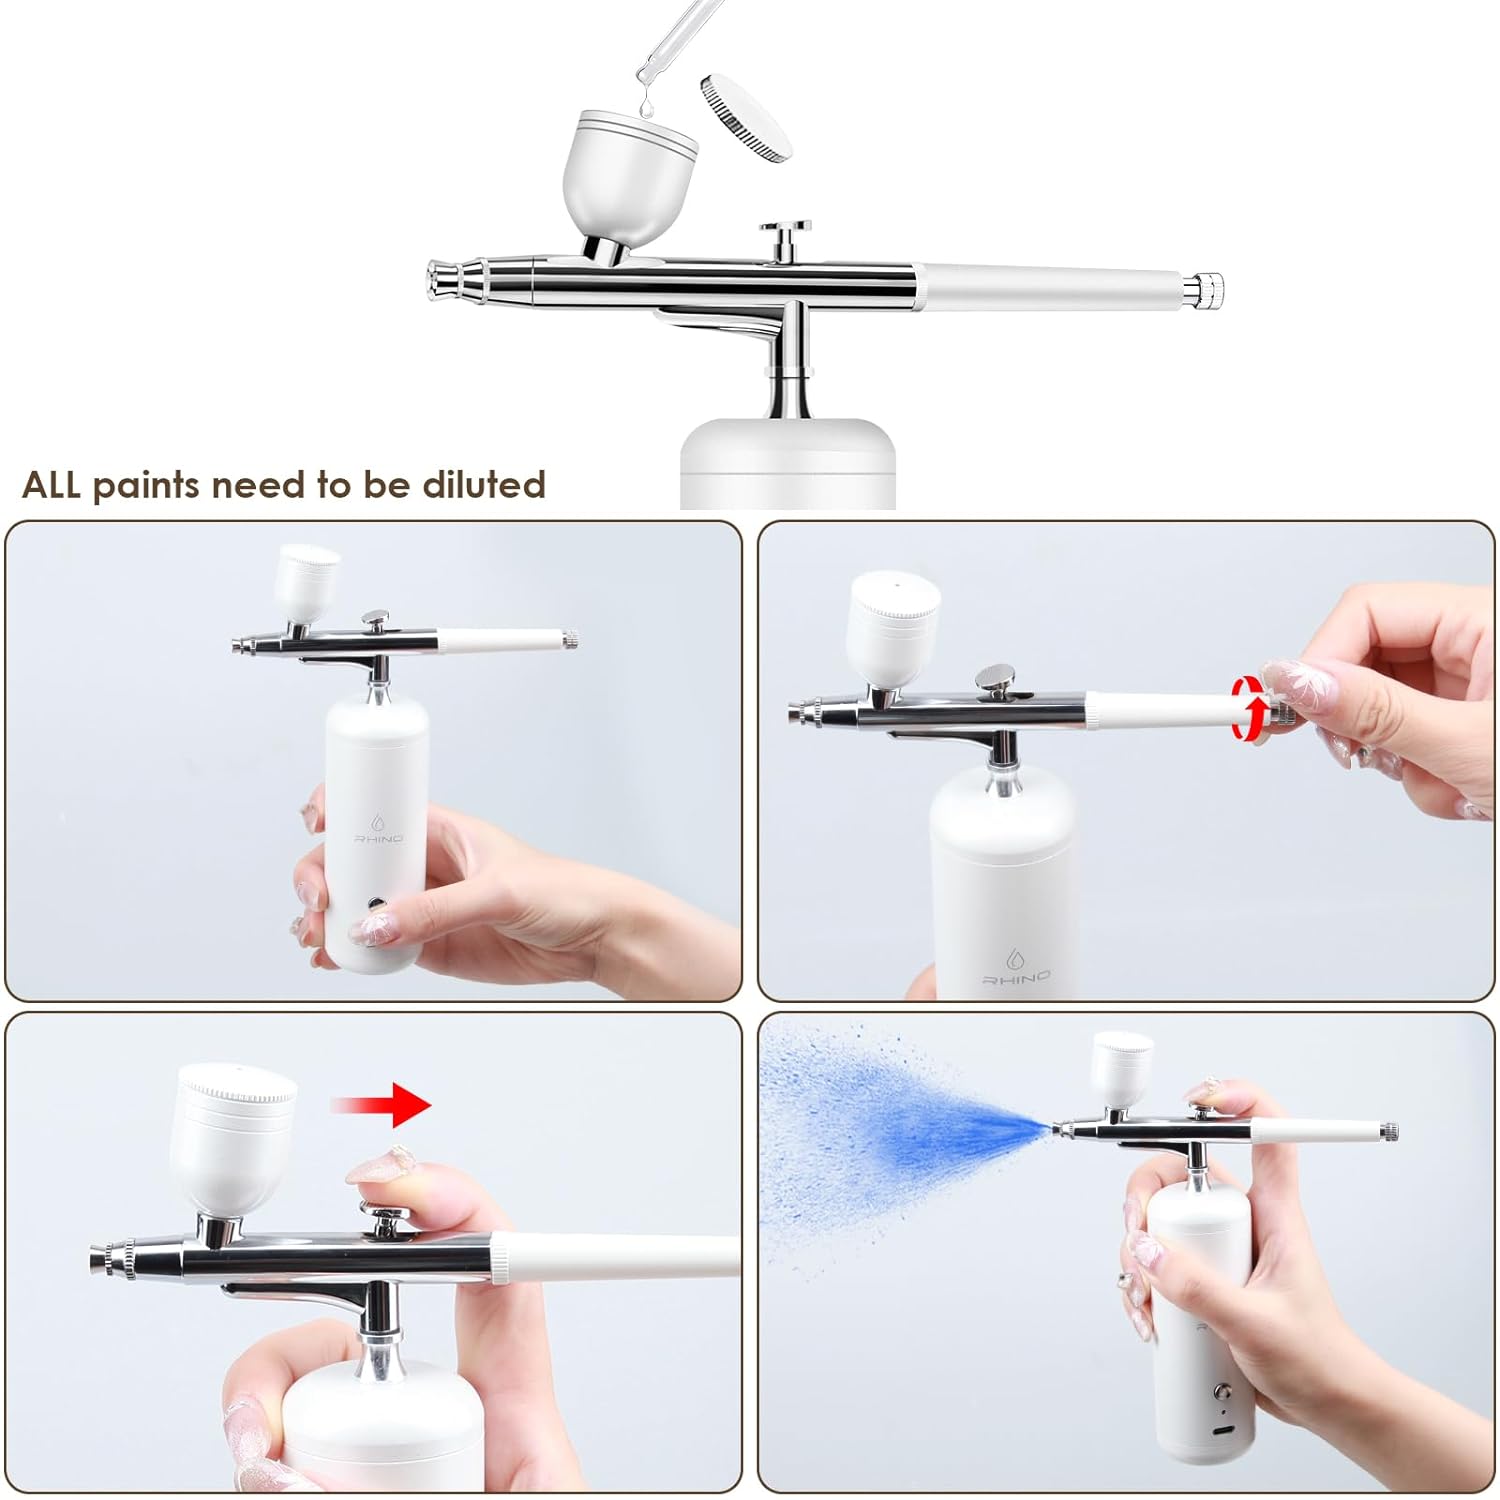 Rechargeable Cordless Airbrush kit with Compressor - Portable Handheld Auto Airbrush Gun Set for Makeup Painting Cake Decor Nail Art Barbers Model Coloring